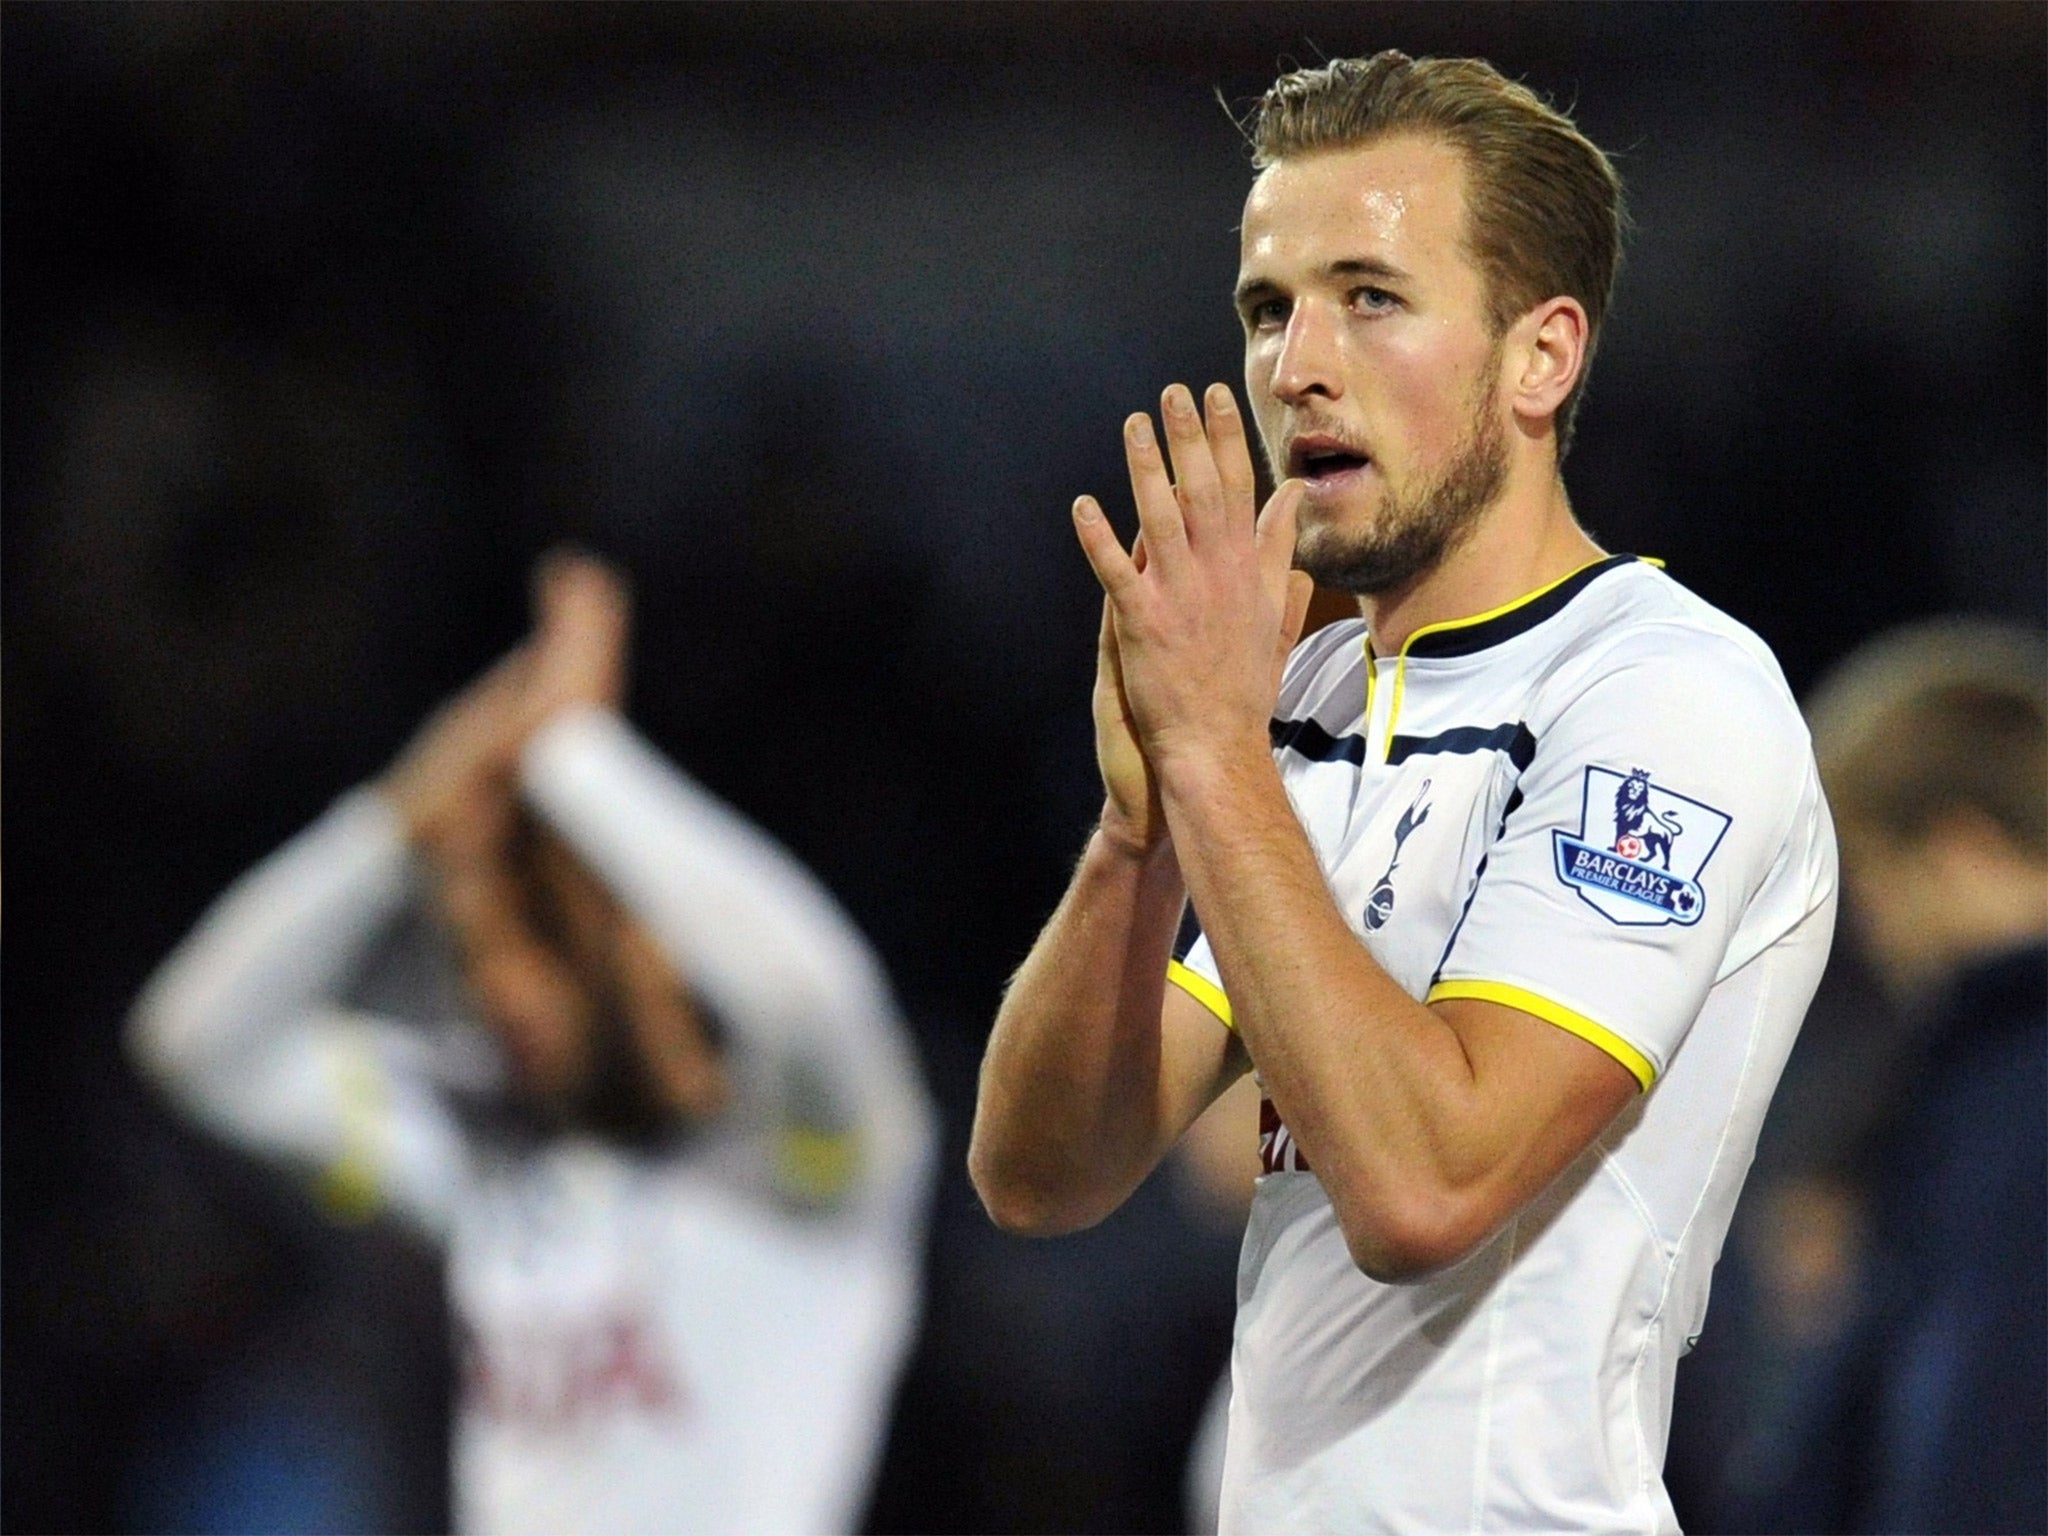 With 18 goals in all competitions so far this season, Harry Kane has earned his rest